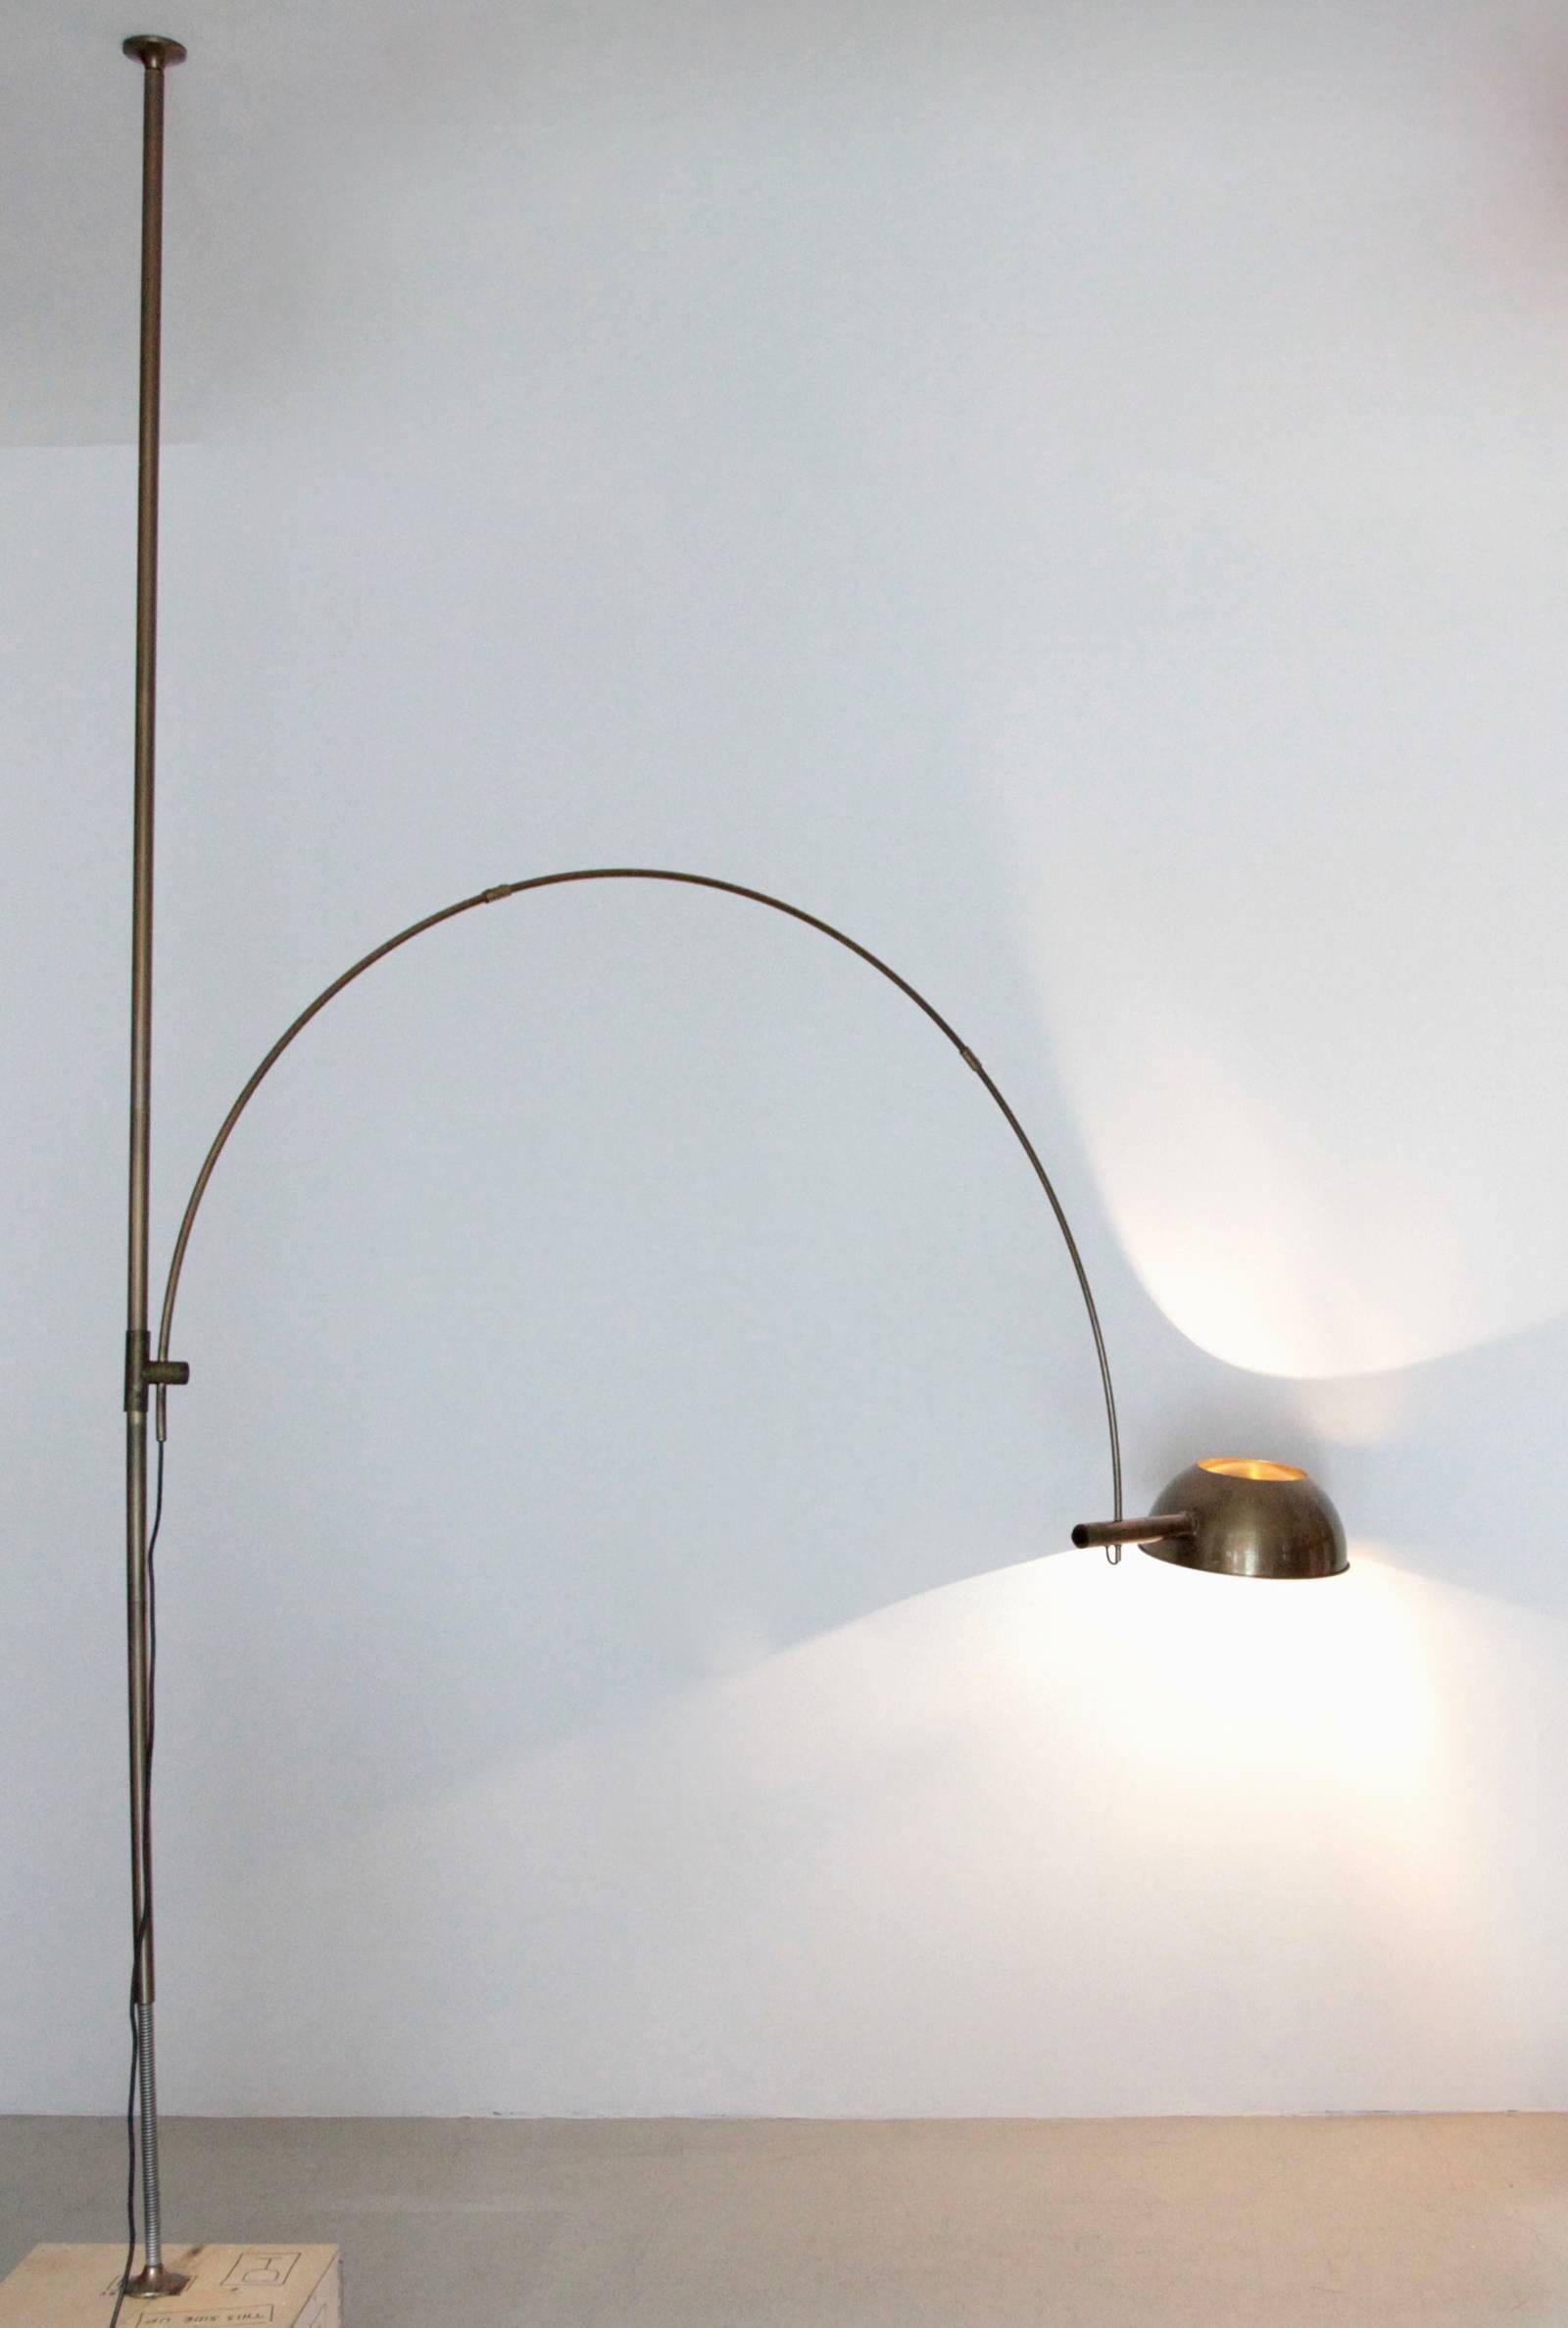 Mid-Century Modern Ceiling to Floor Lamp by Florian Schulz with Adjustable Arc, Germany, 1970s